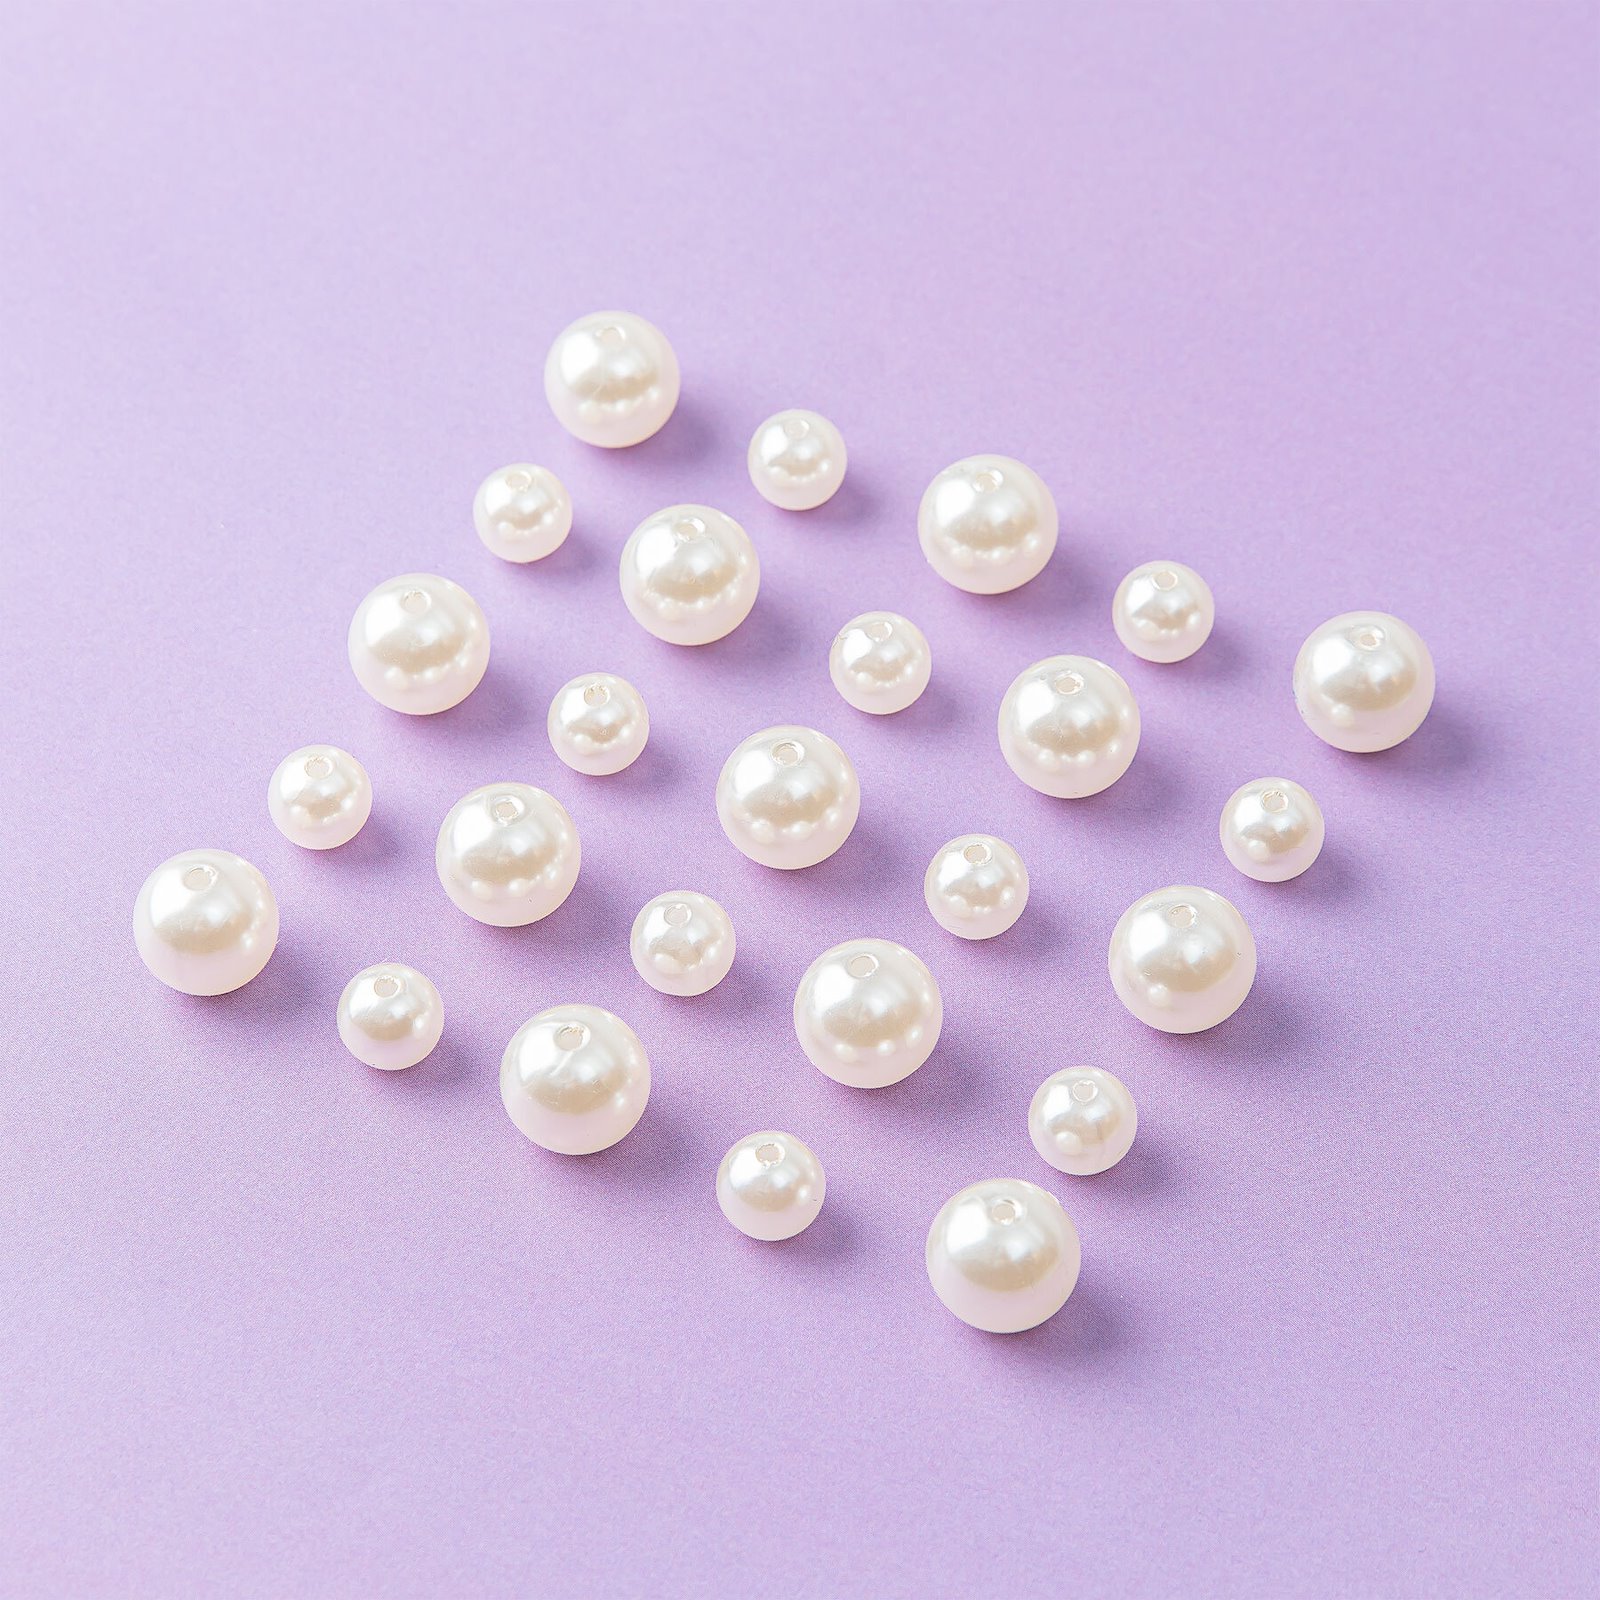 Beads 14mm MOP col. offwhite 25pcs 43261_43251_sskit